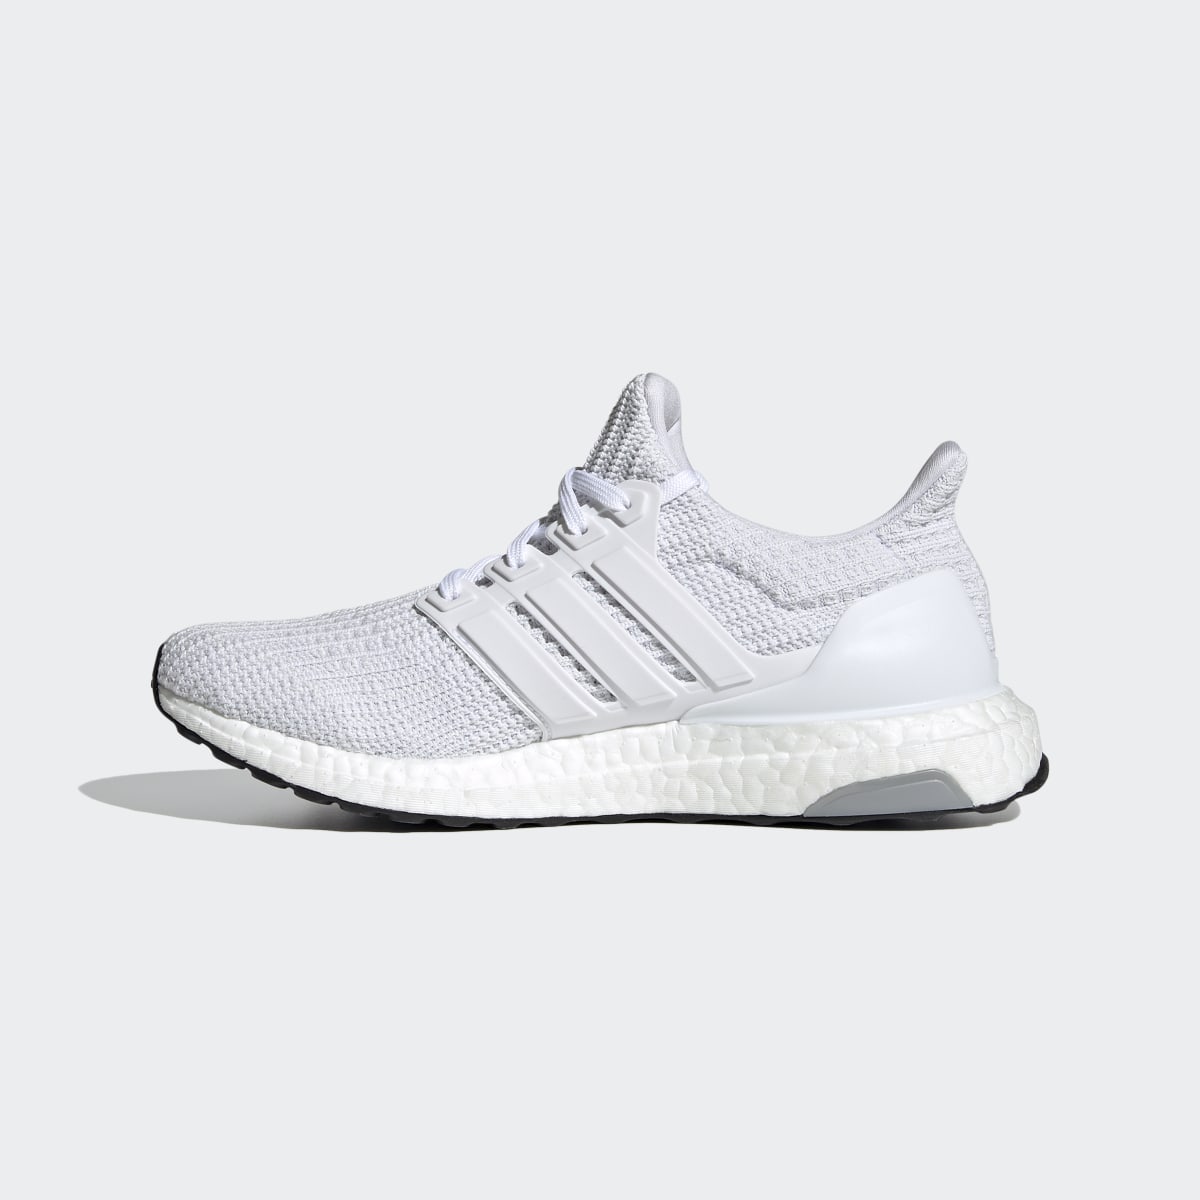 Adidas Ultraboost 4.0 DNA Shoes. 8